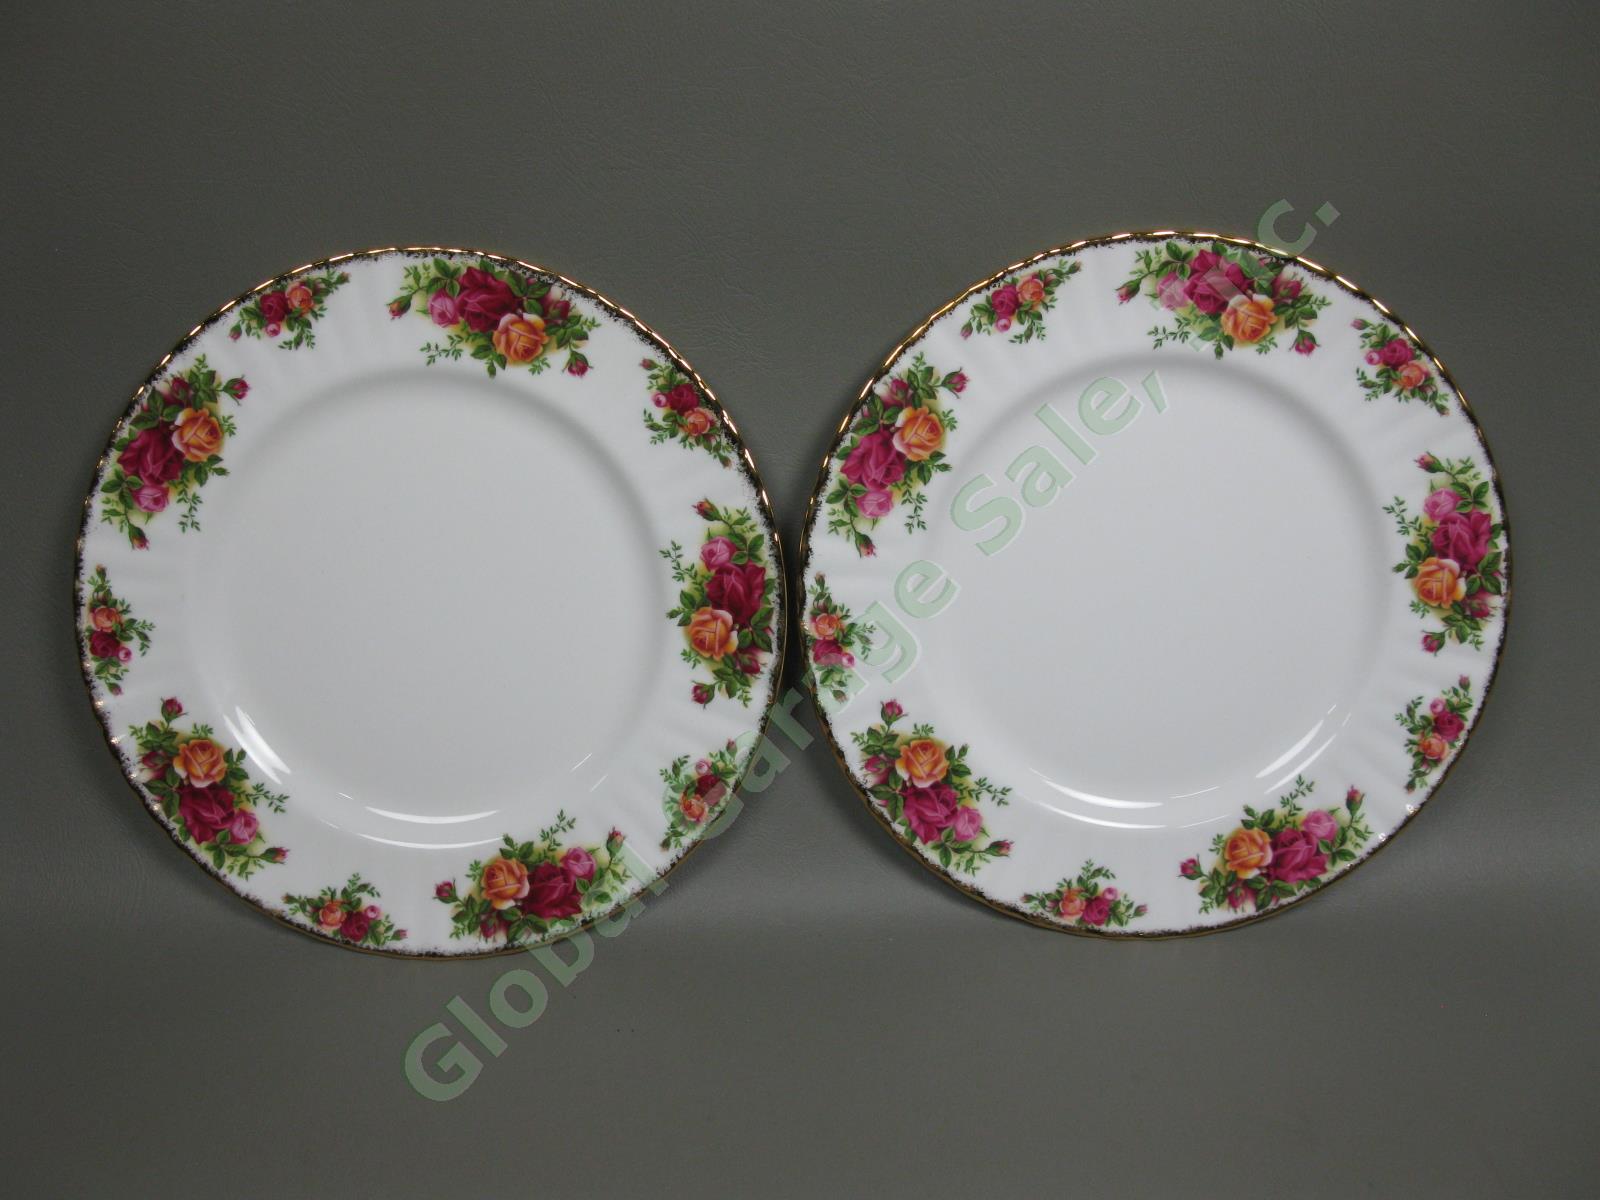 8 Royal Albert Old Country Roses Dinner Plate Fluted Gold Trim Bone China Set NR 8